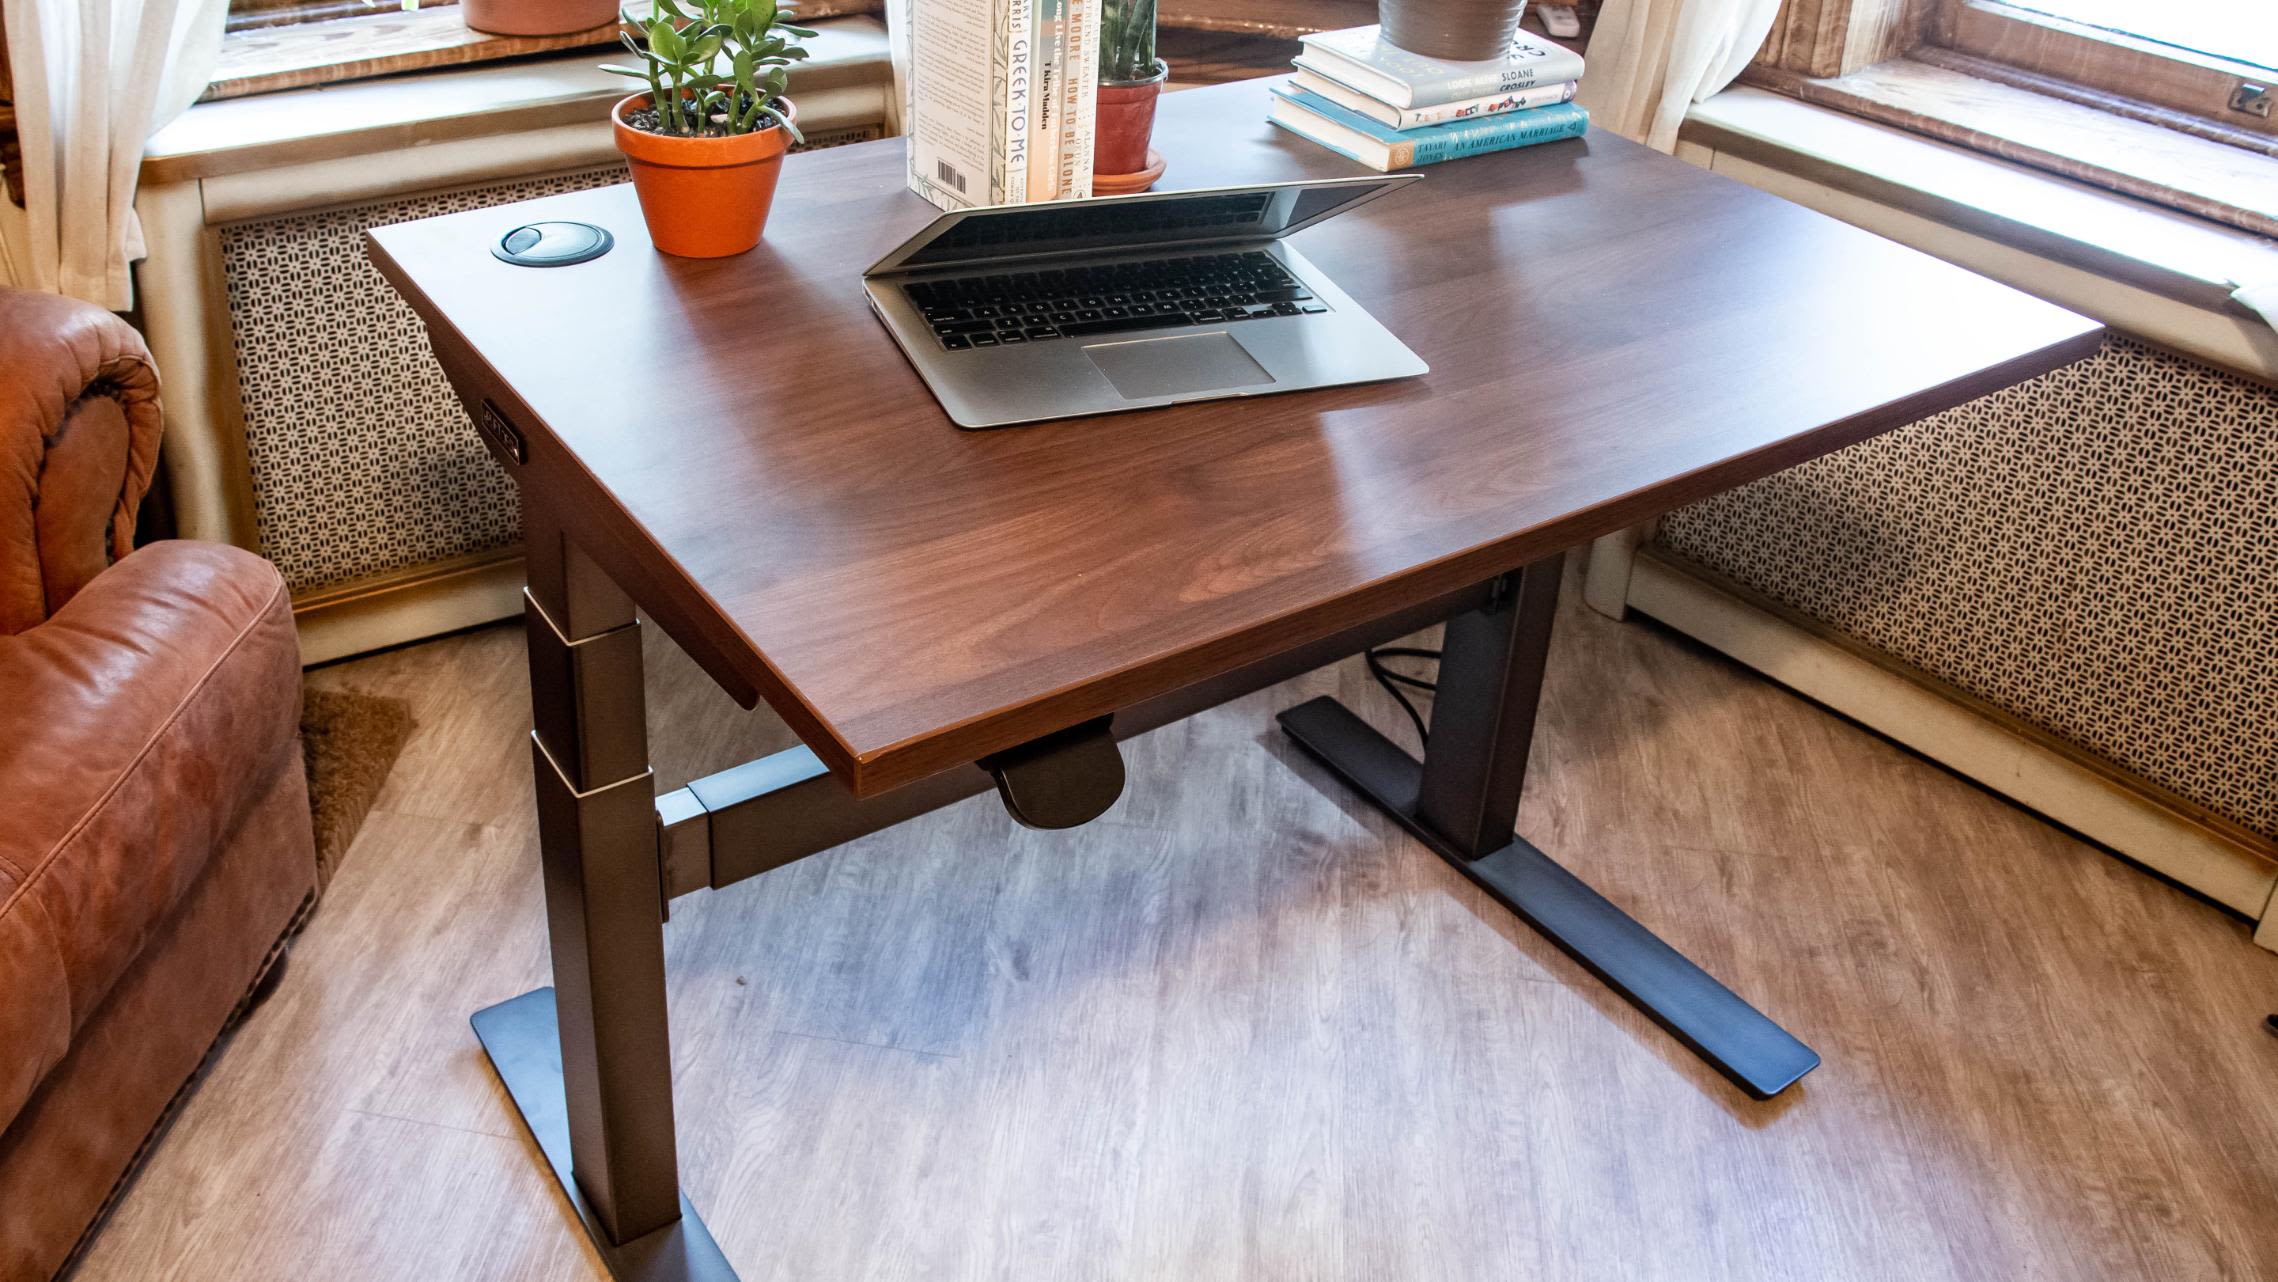 6 Office Essentials You Need for Working from Home